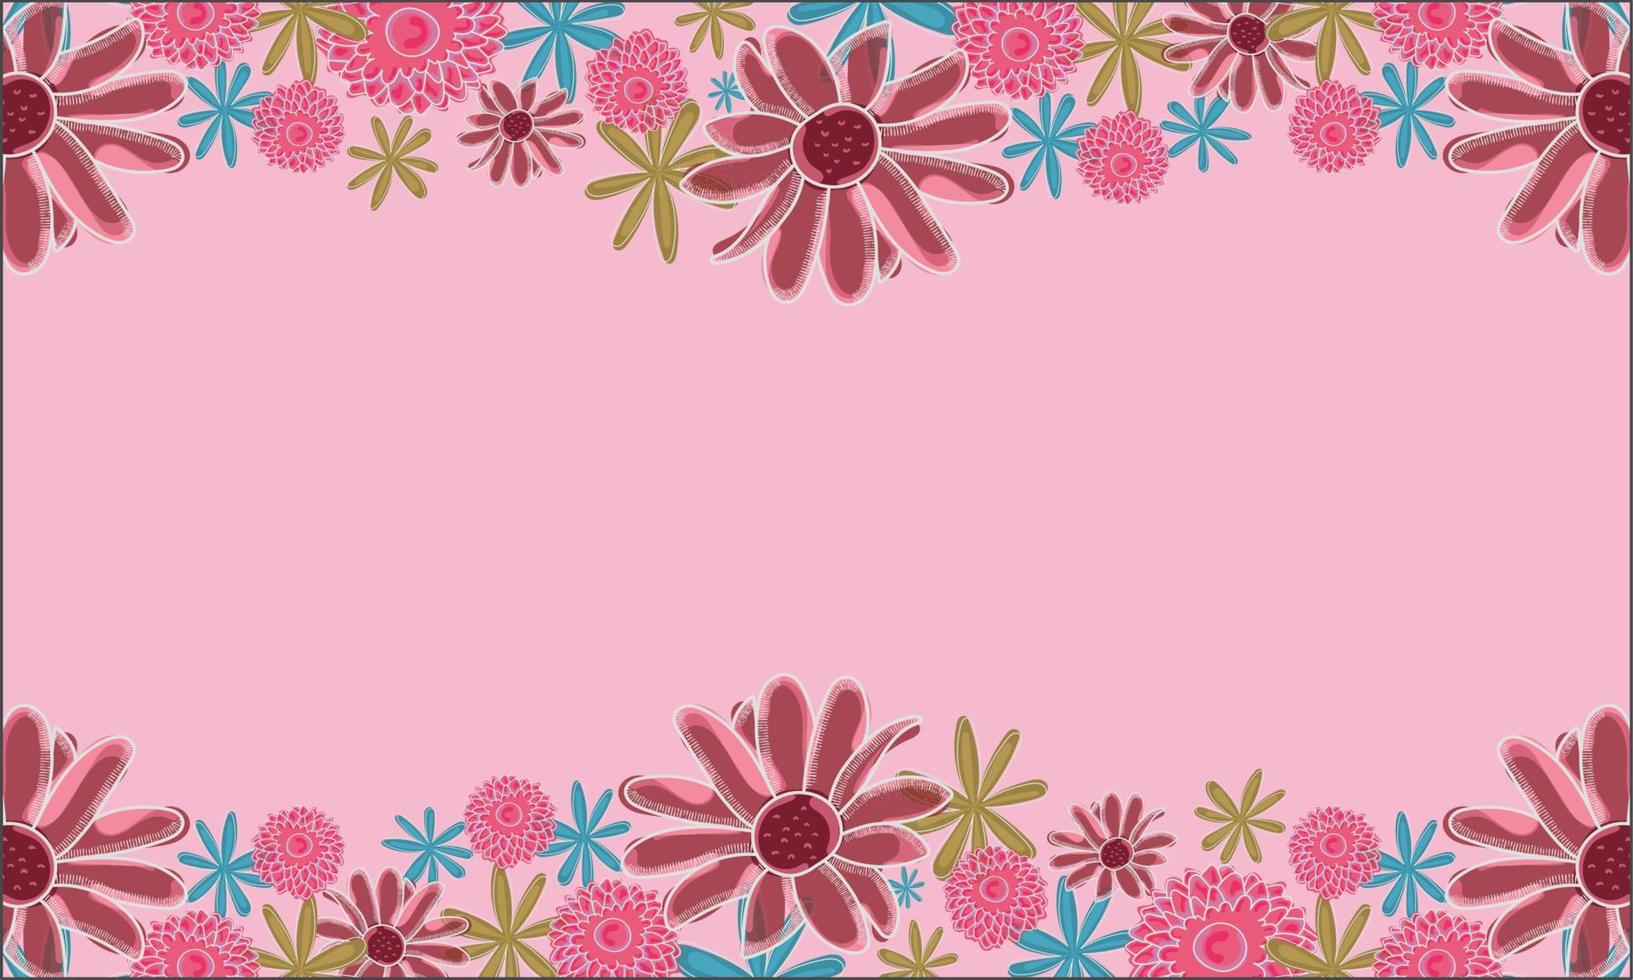 Pink pom pom and daisy flowers background vector